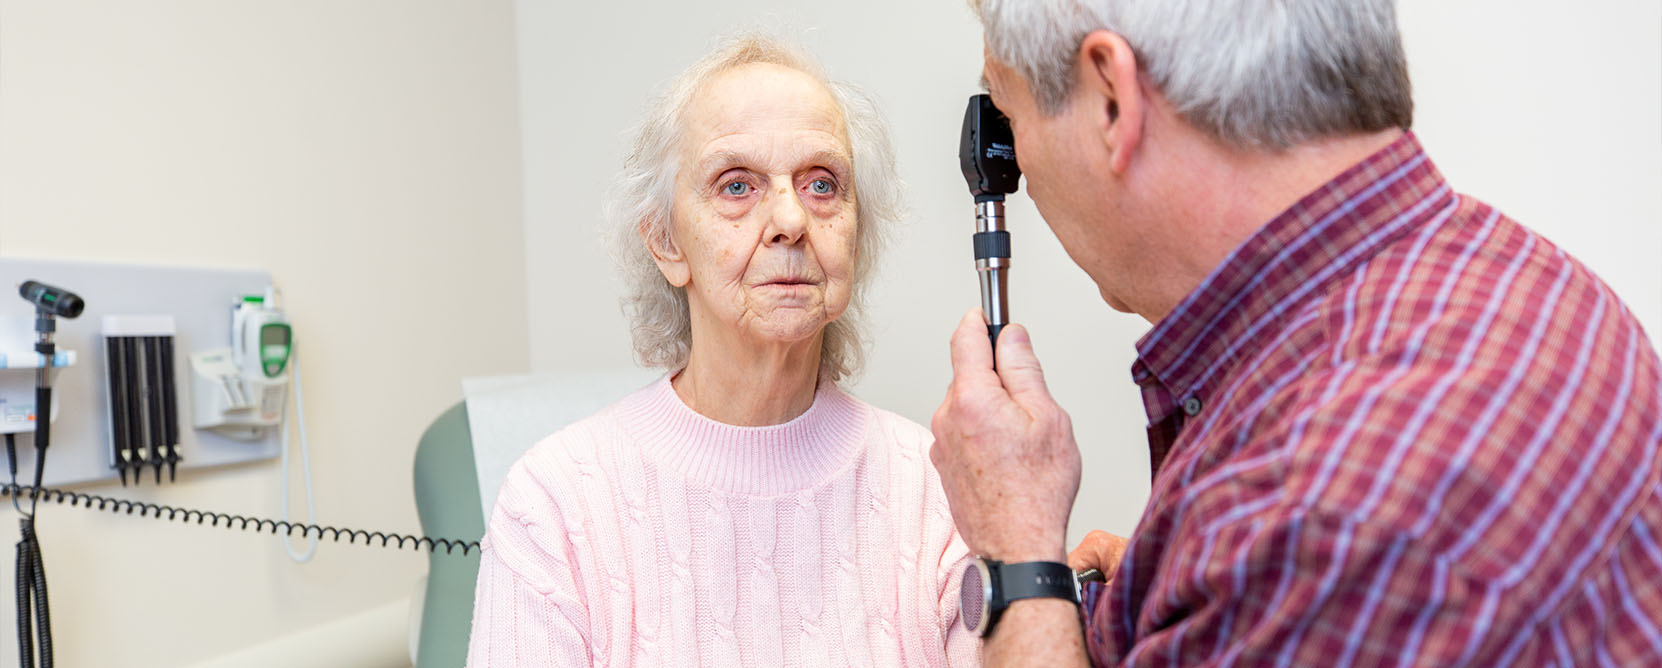 Older adult patient has her eyesight checked by a doctor